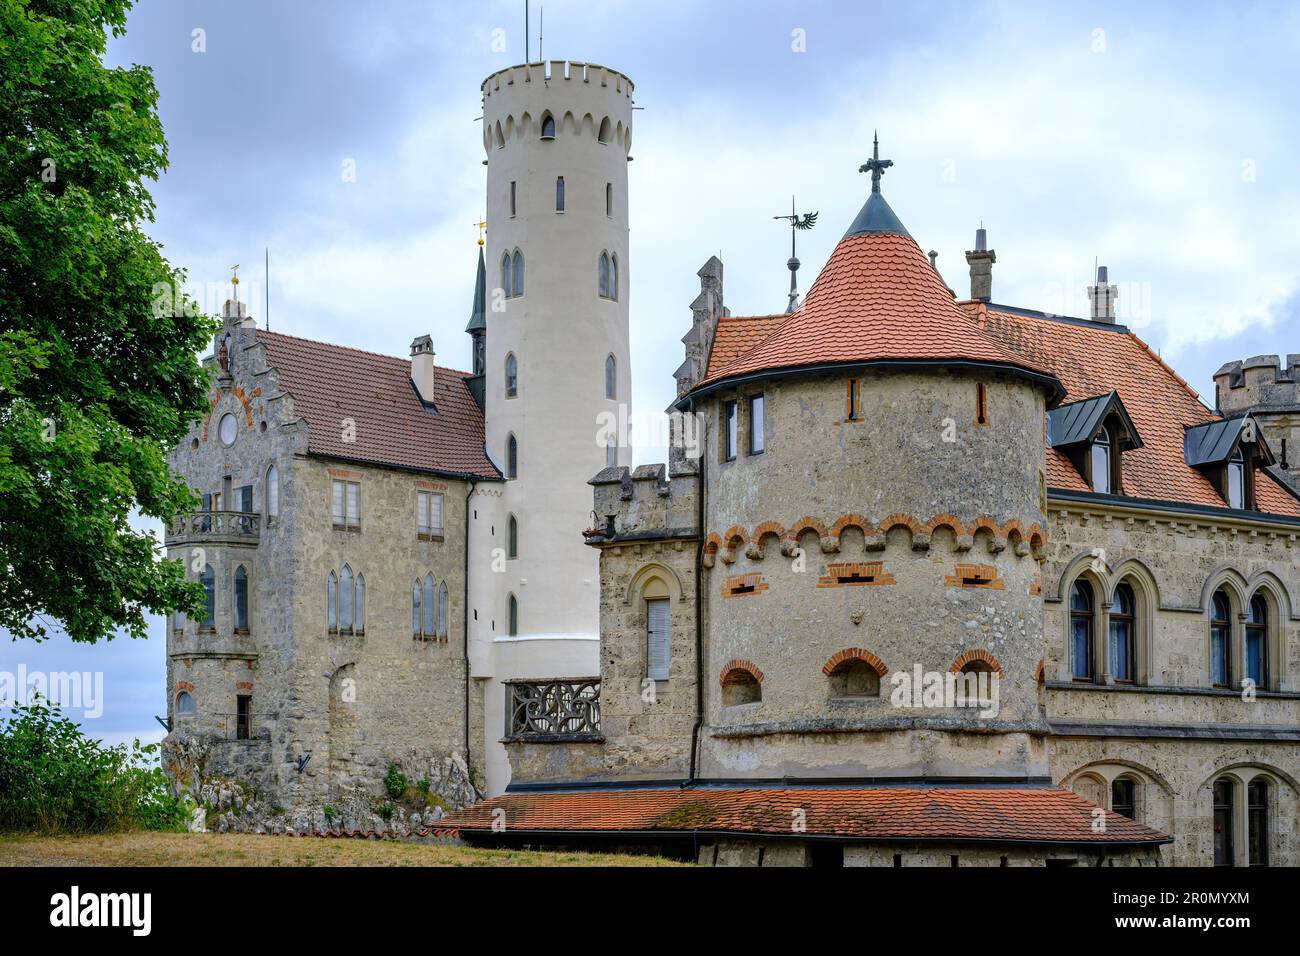 Lichtenstein Castle, a Historicist edifice in neo-Gothic style, overlooking the settlement of Honau, Swabian Alb, Baden-Wurttemberg, Germany, Europe. Stock Photo